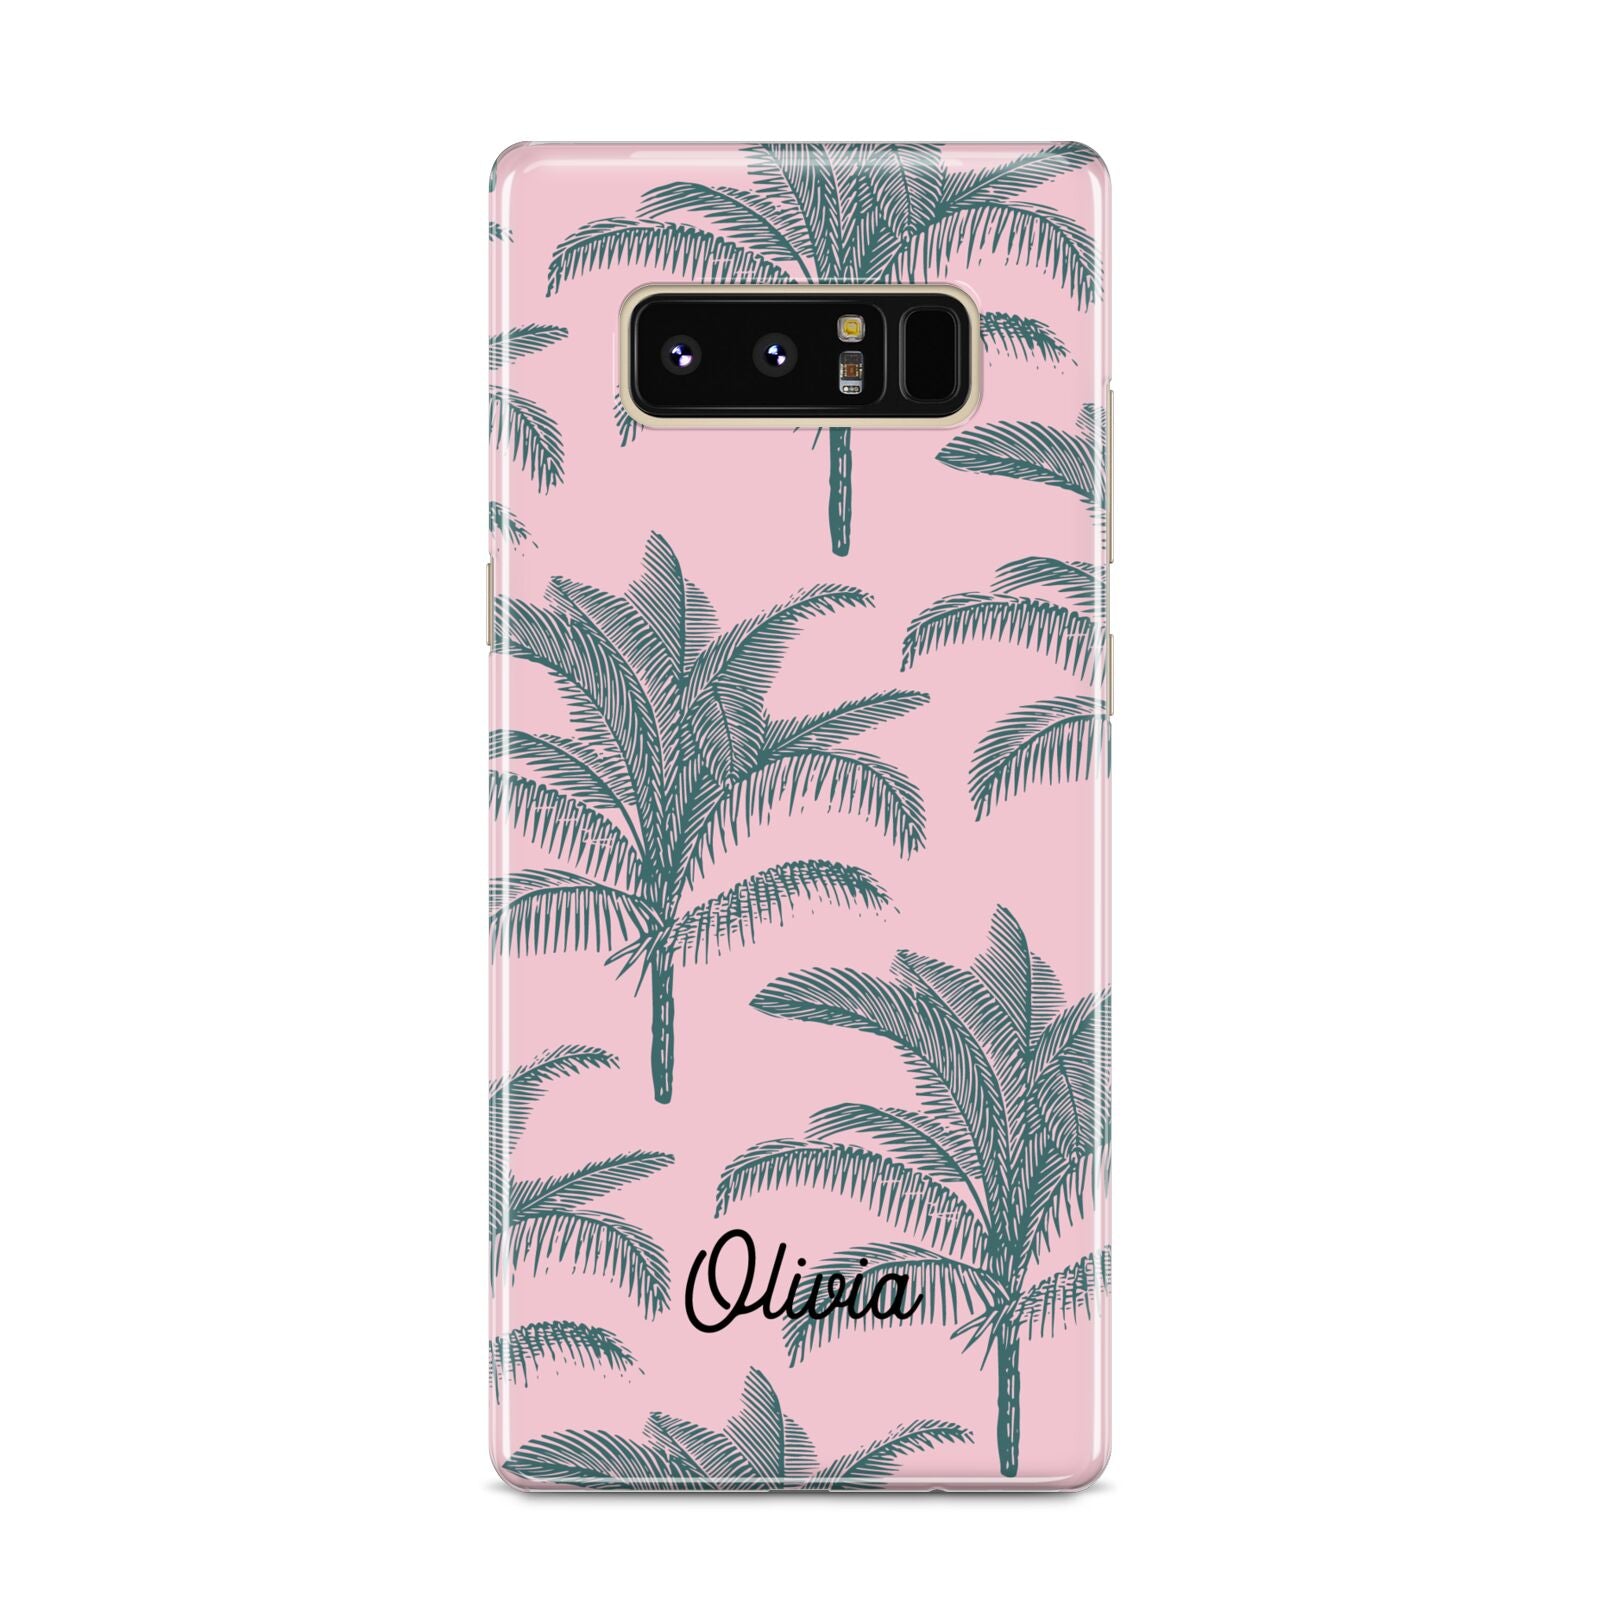 Personalised Palm Samsung Galaxy S8 Case